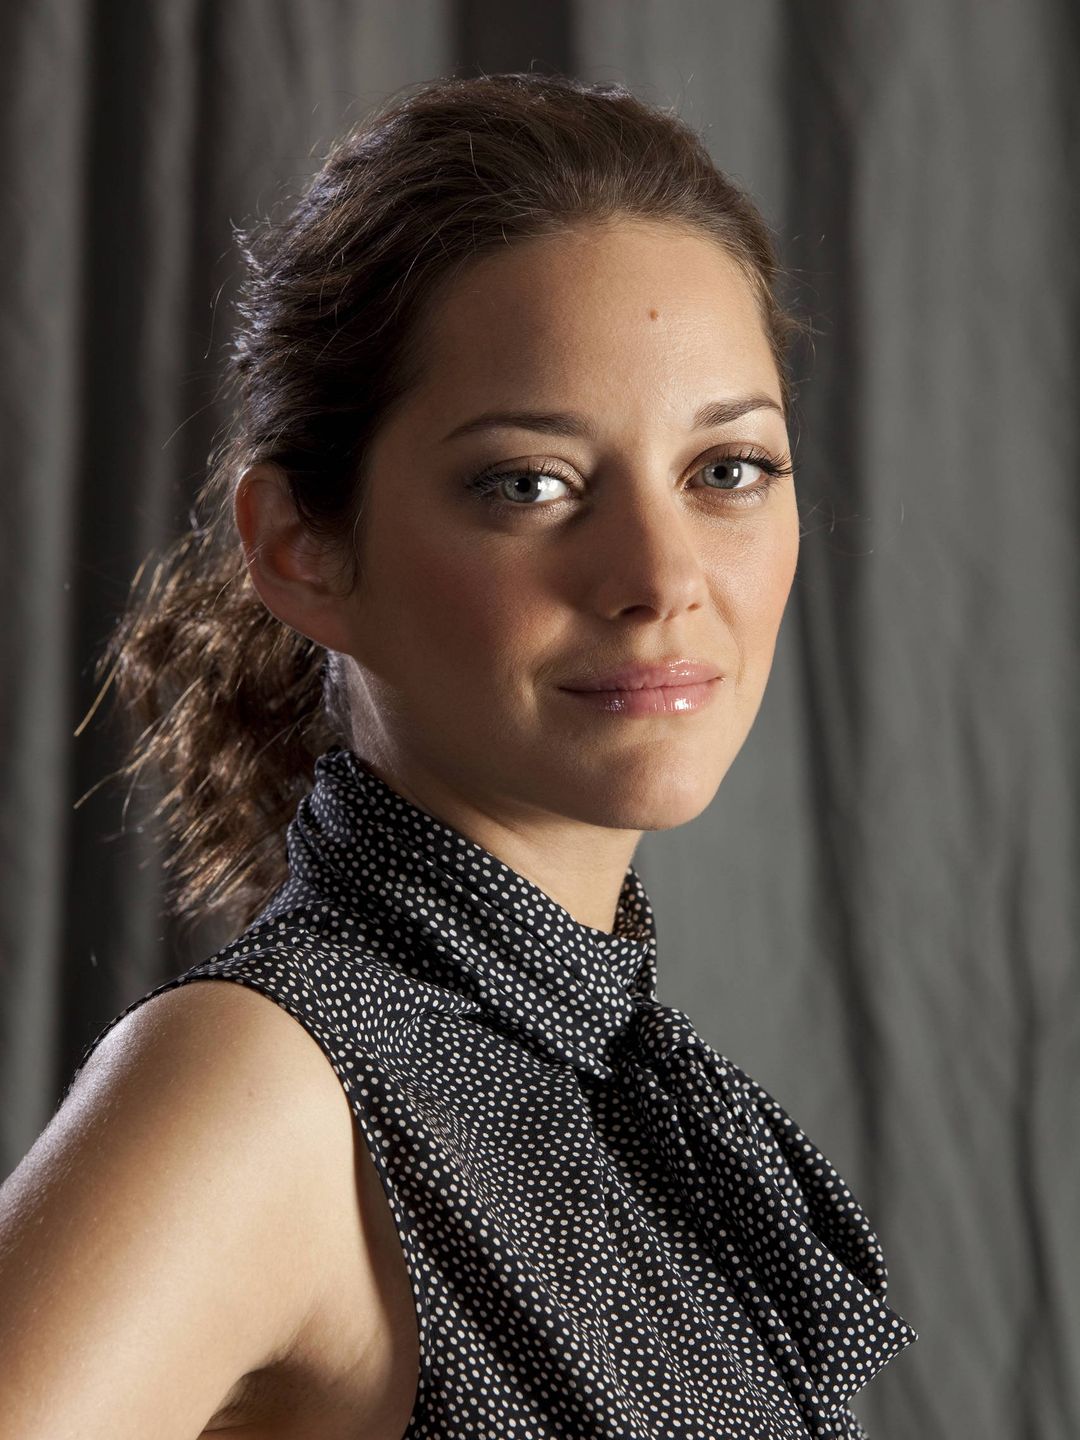 Marion Cotillard who is her father